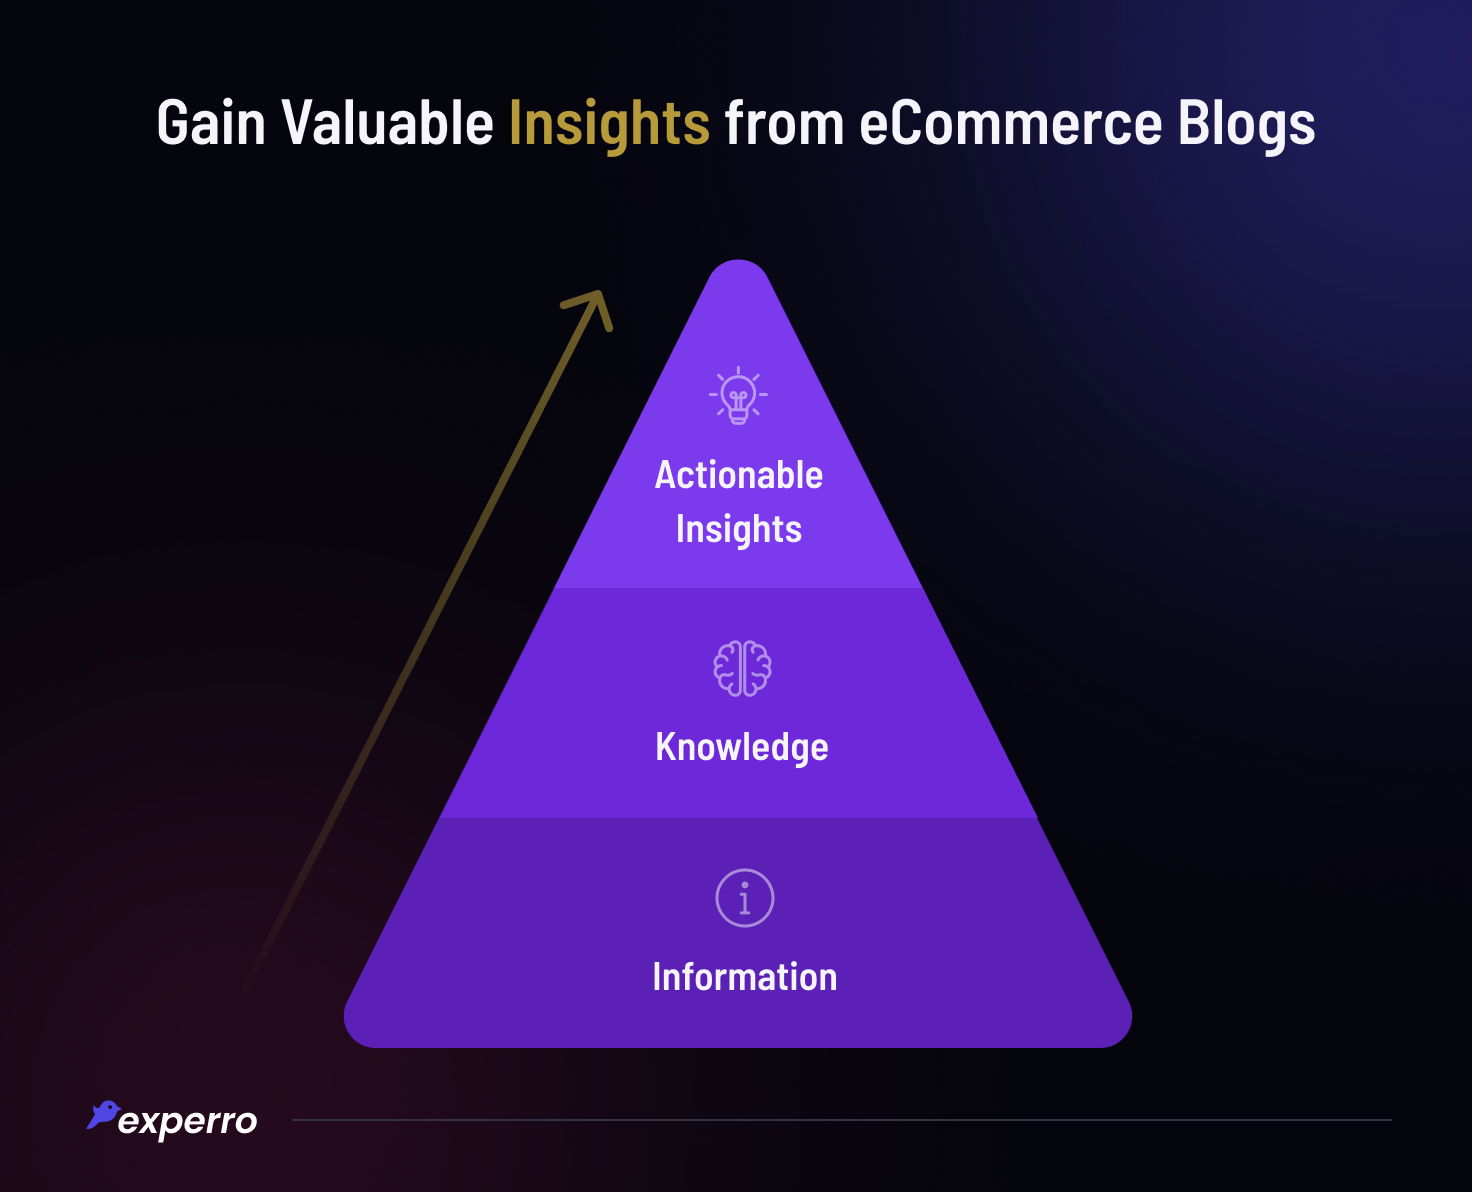 eCommerce Blogs Give Valuable Insights